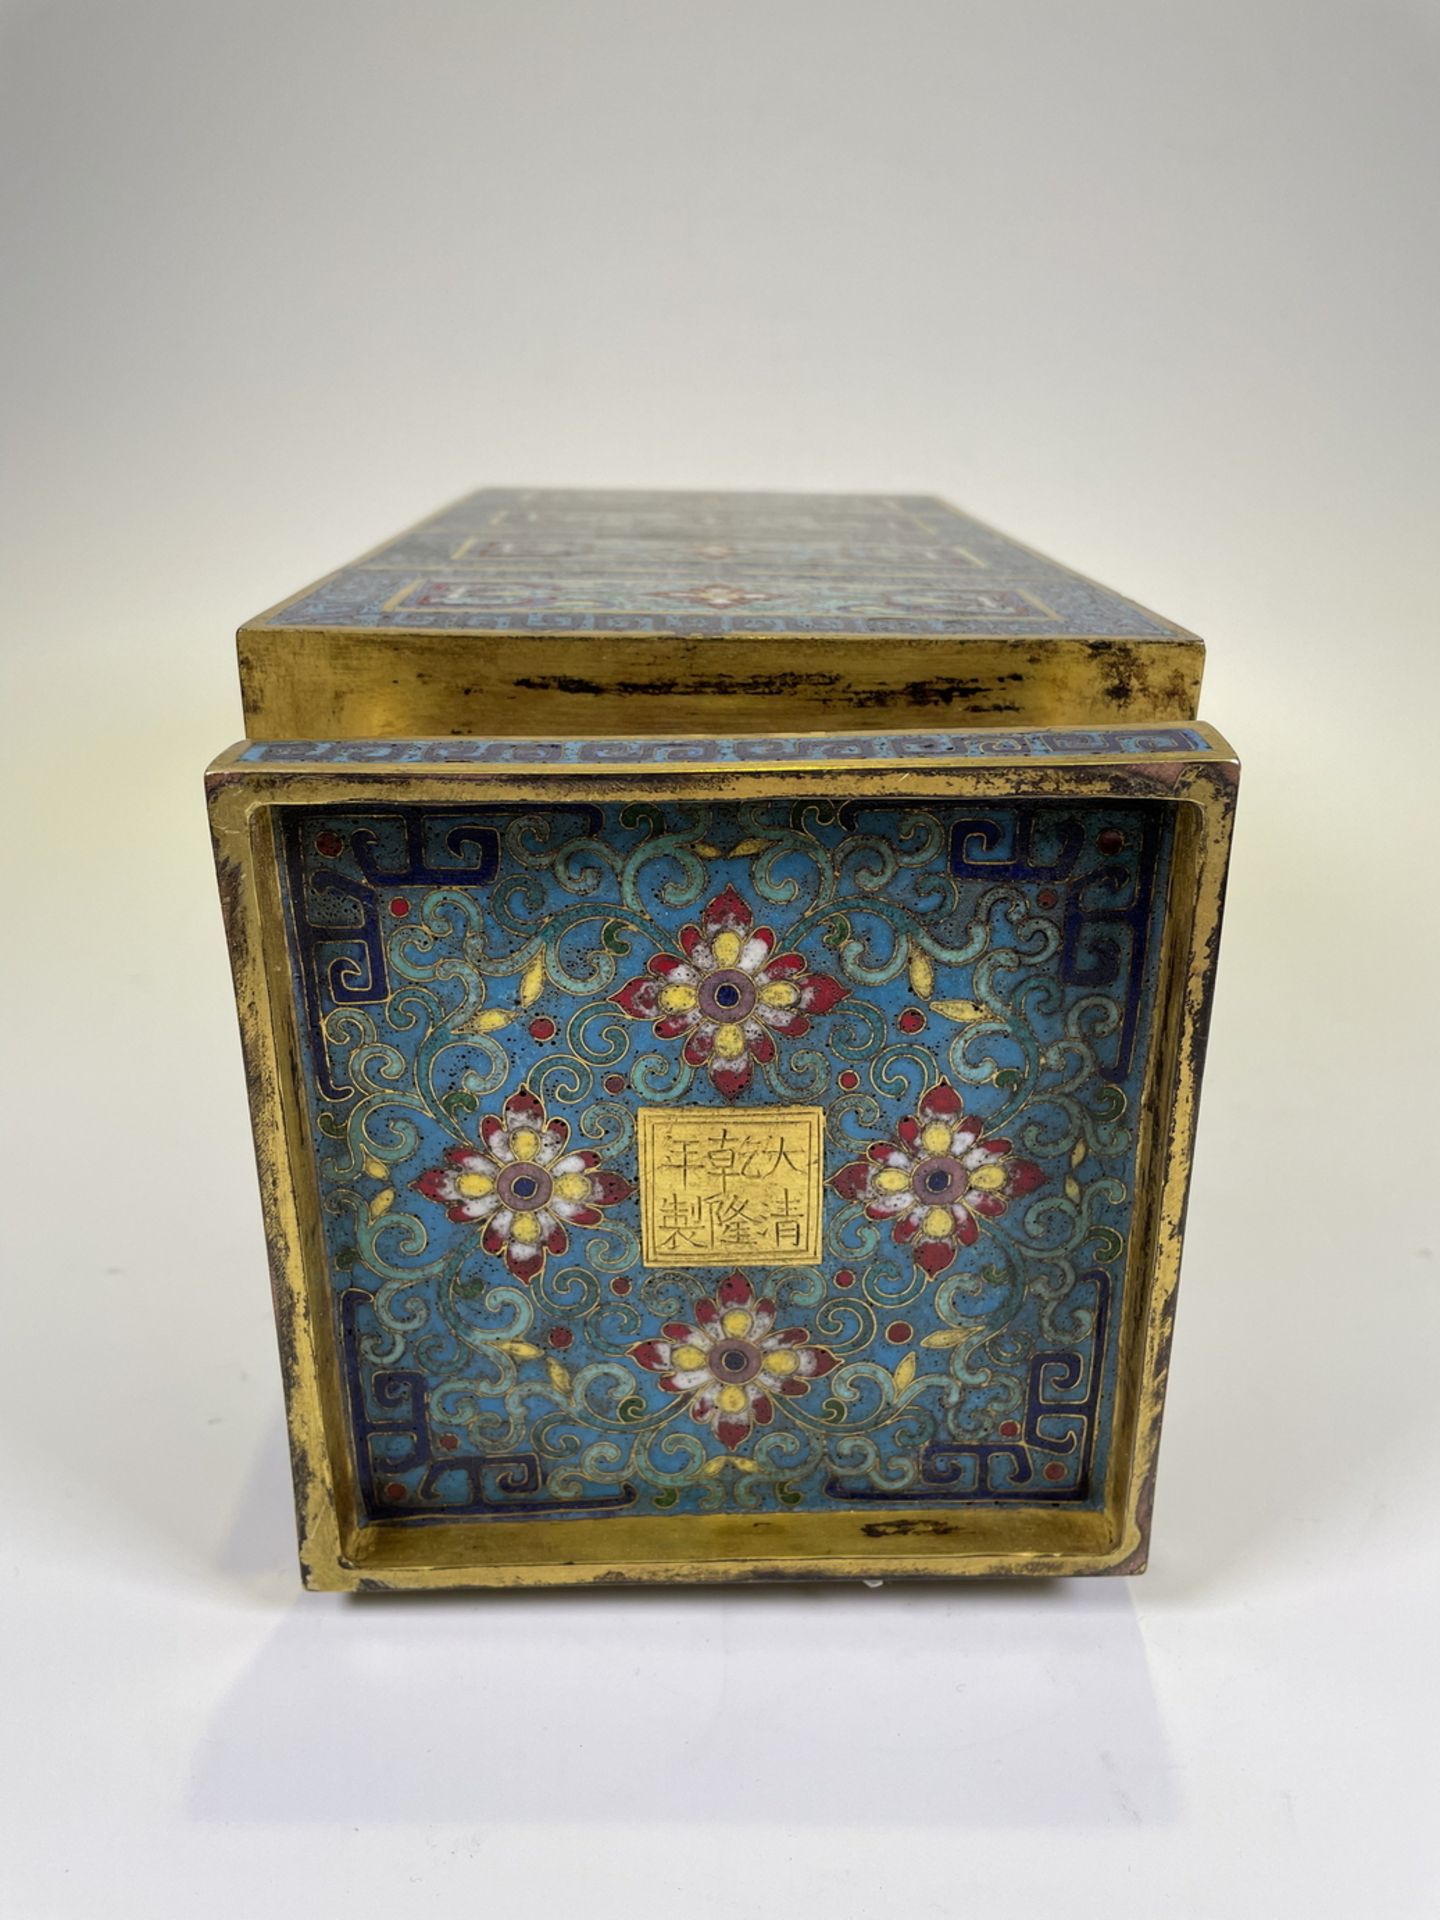 FINE CHINESE CLOISONNE, 17TH/19TH Century Pr.  Collection of NARA private gallary. - Image 10 of 10